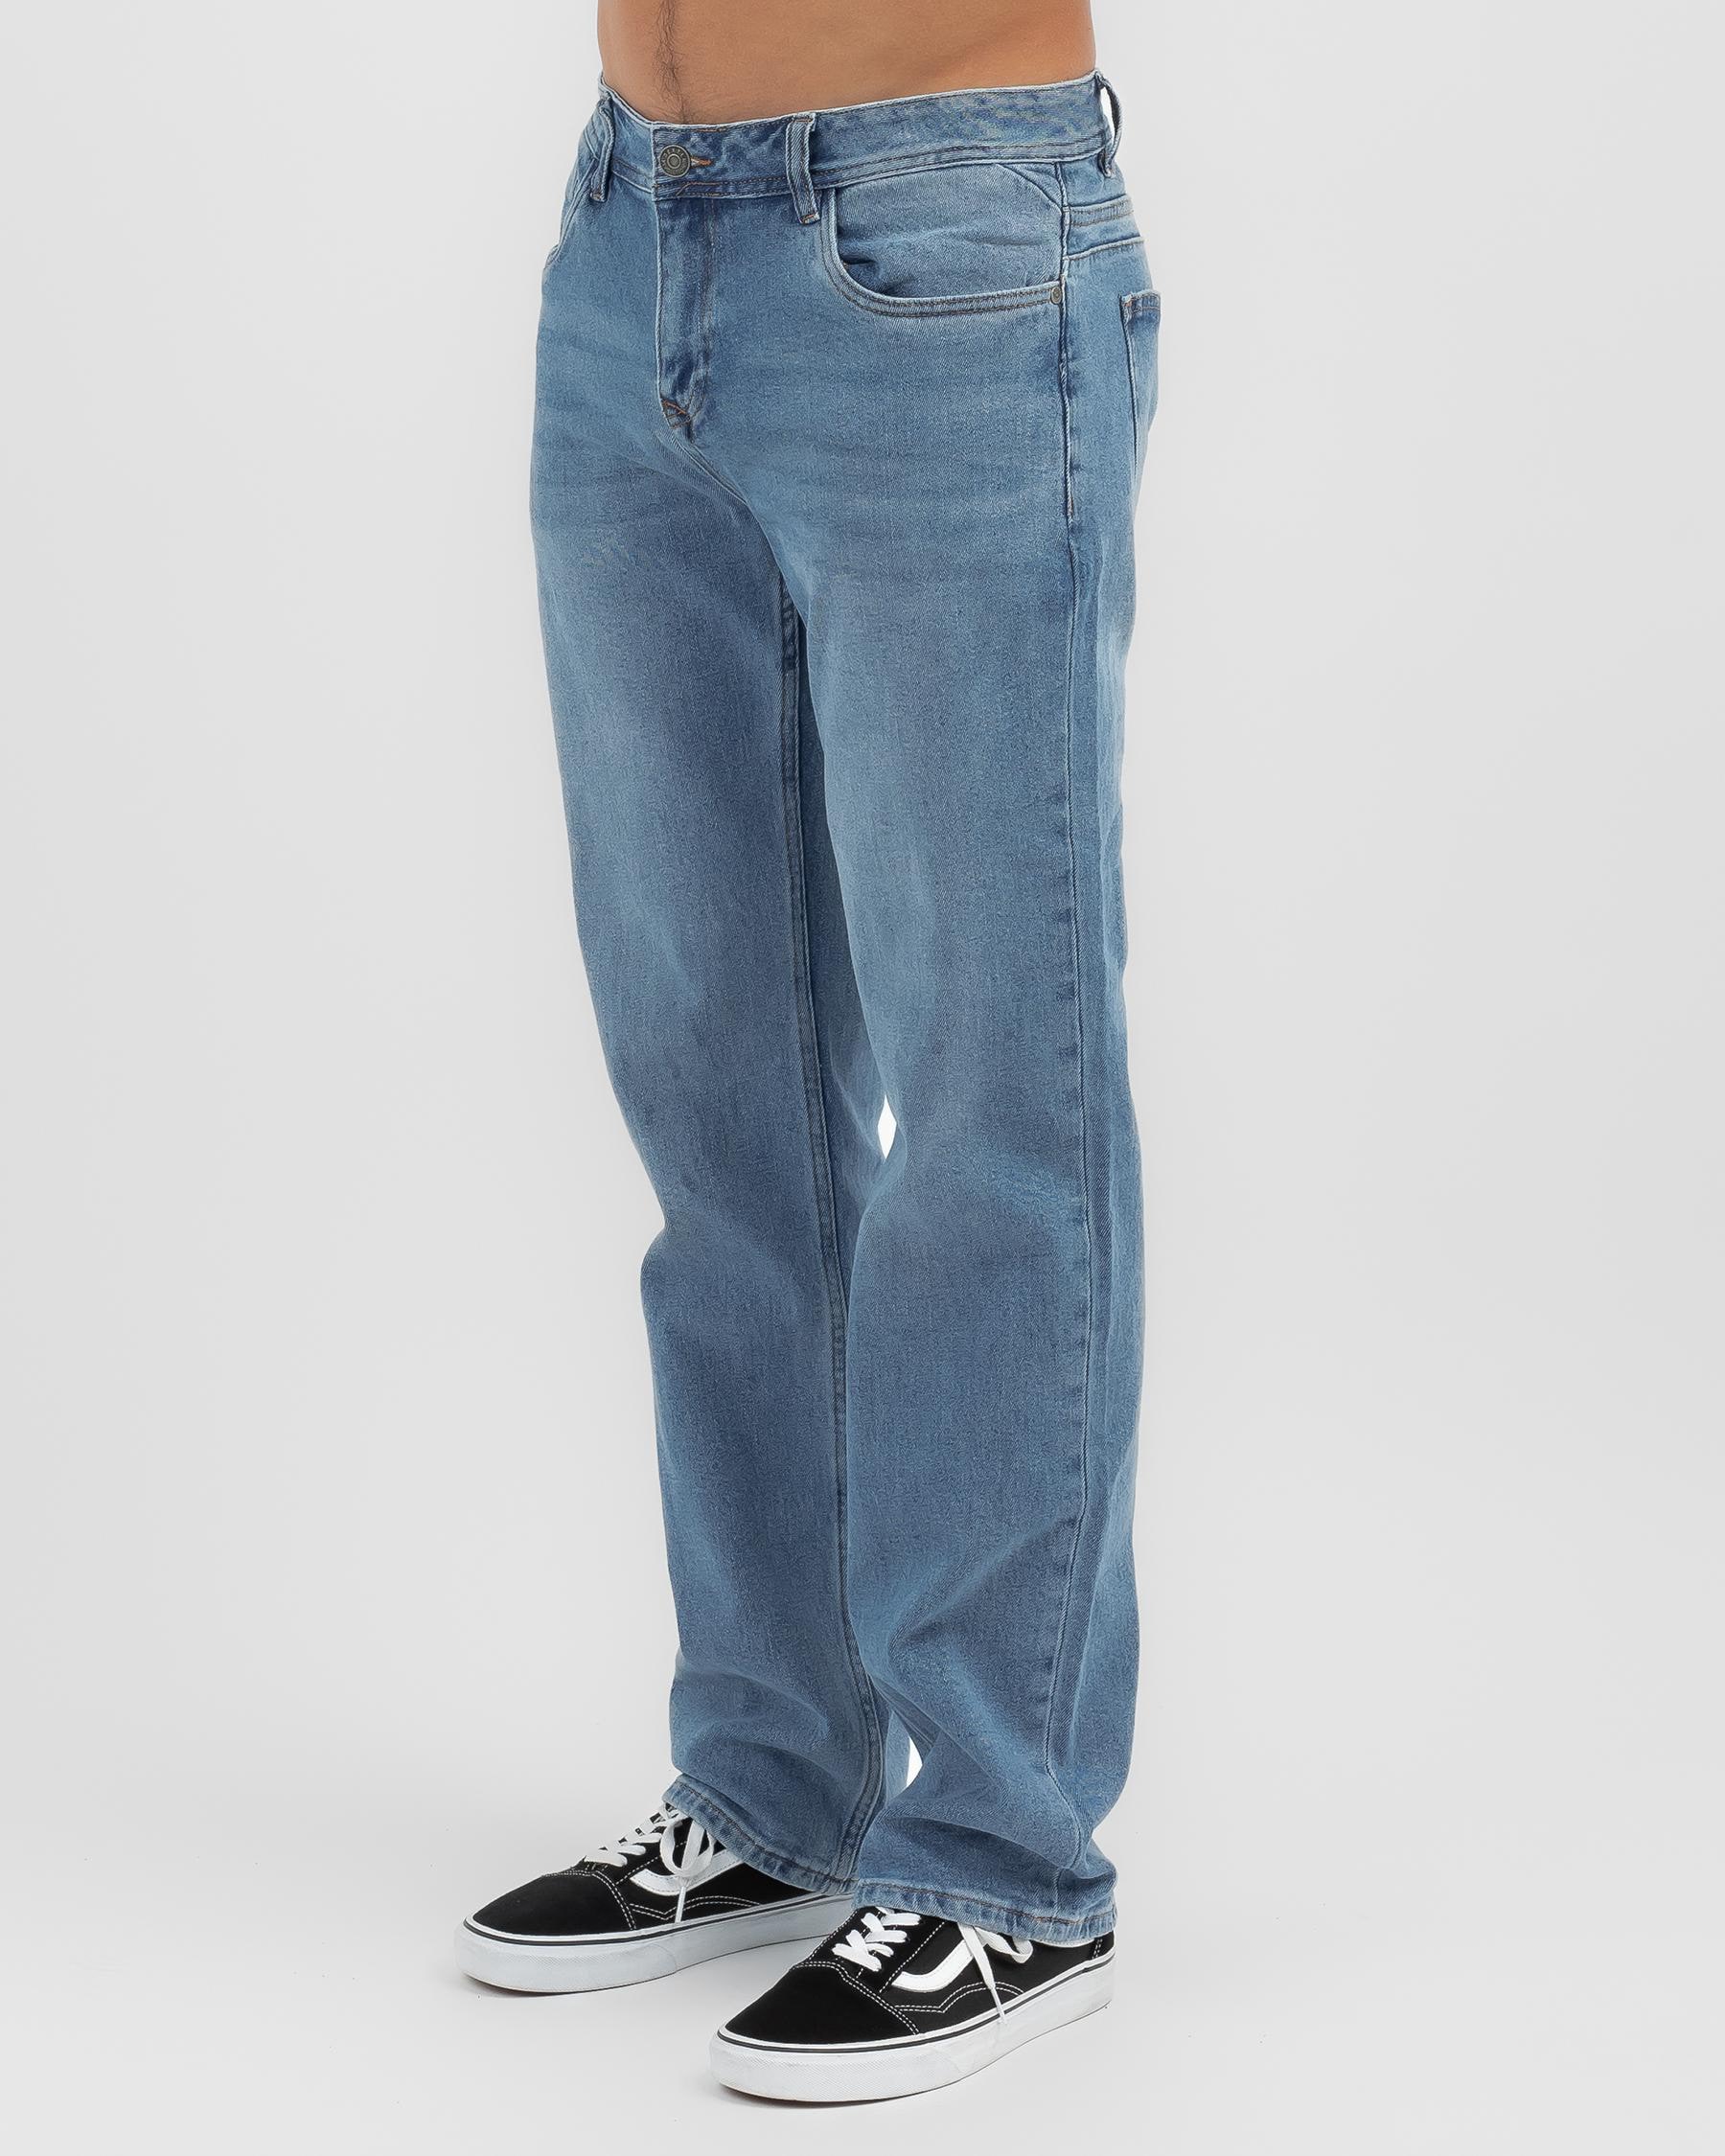 Shop Dexter Impact Jeans In Mid Blue - Fast Shipping & Easy Returns ...